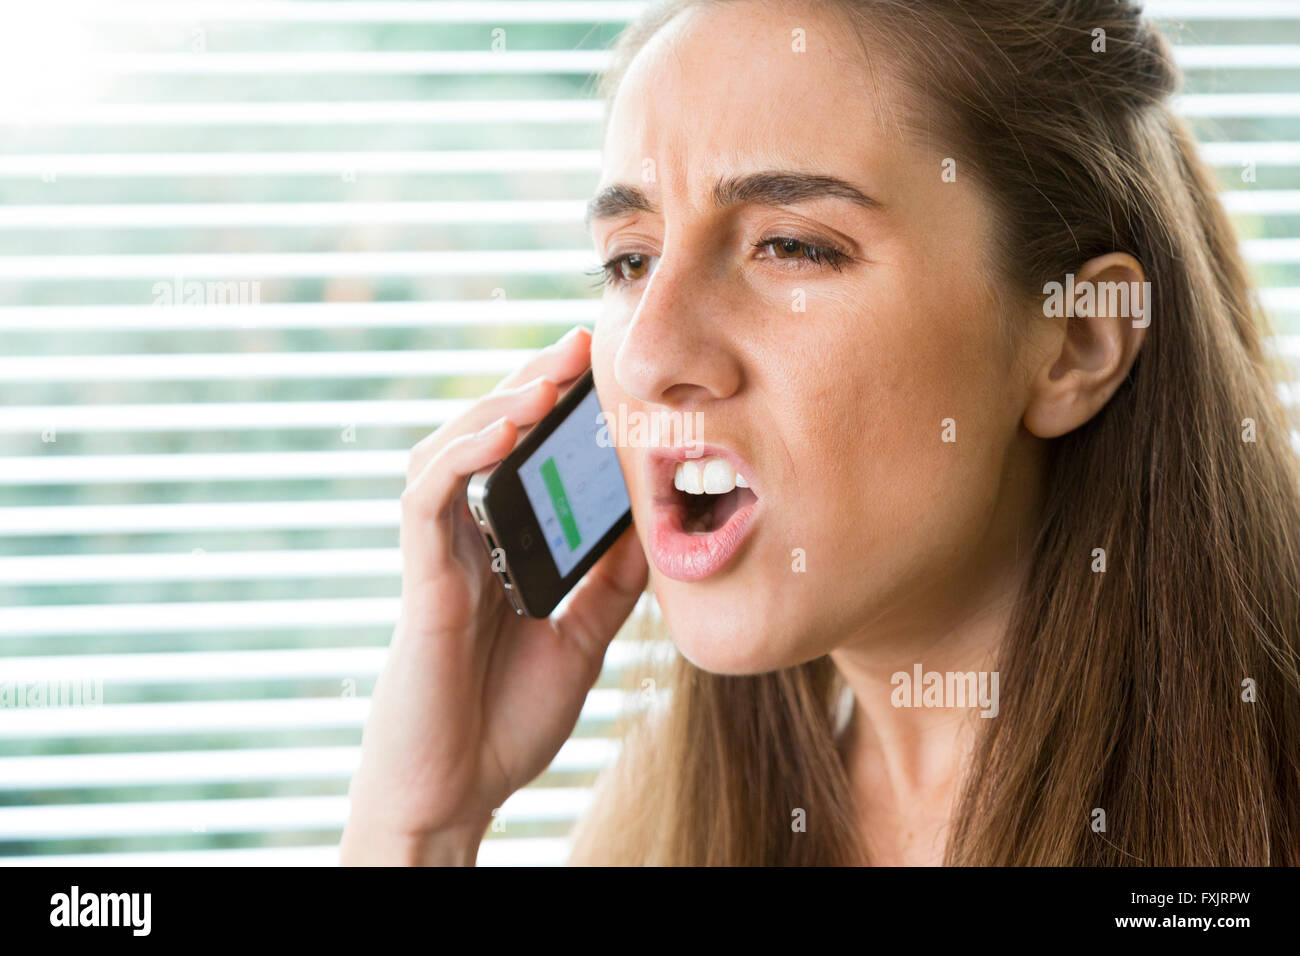 young woman shouting on mobile phone Stock Photo